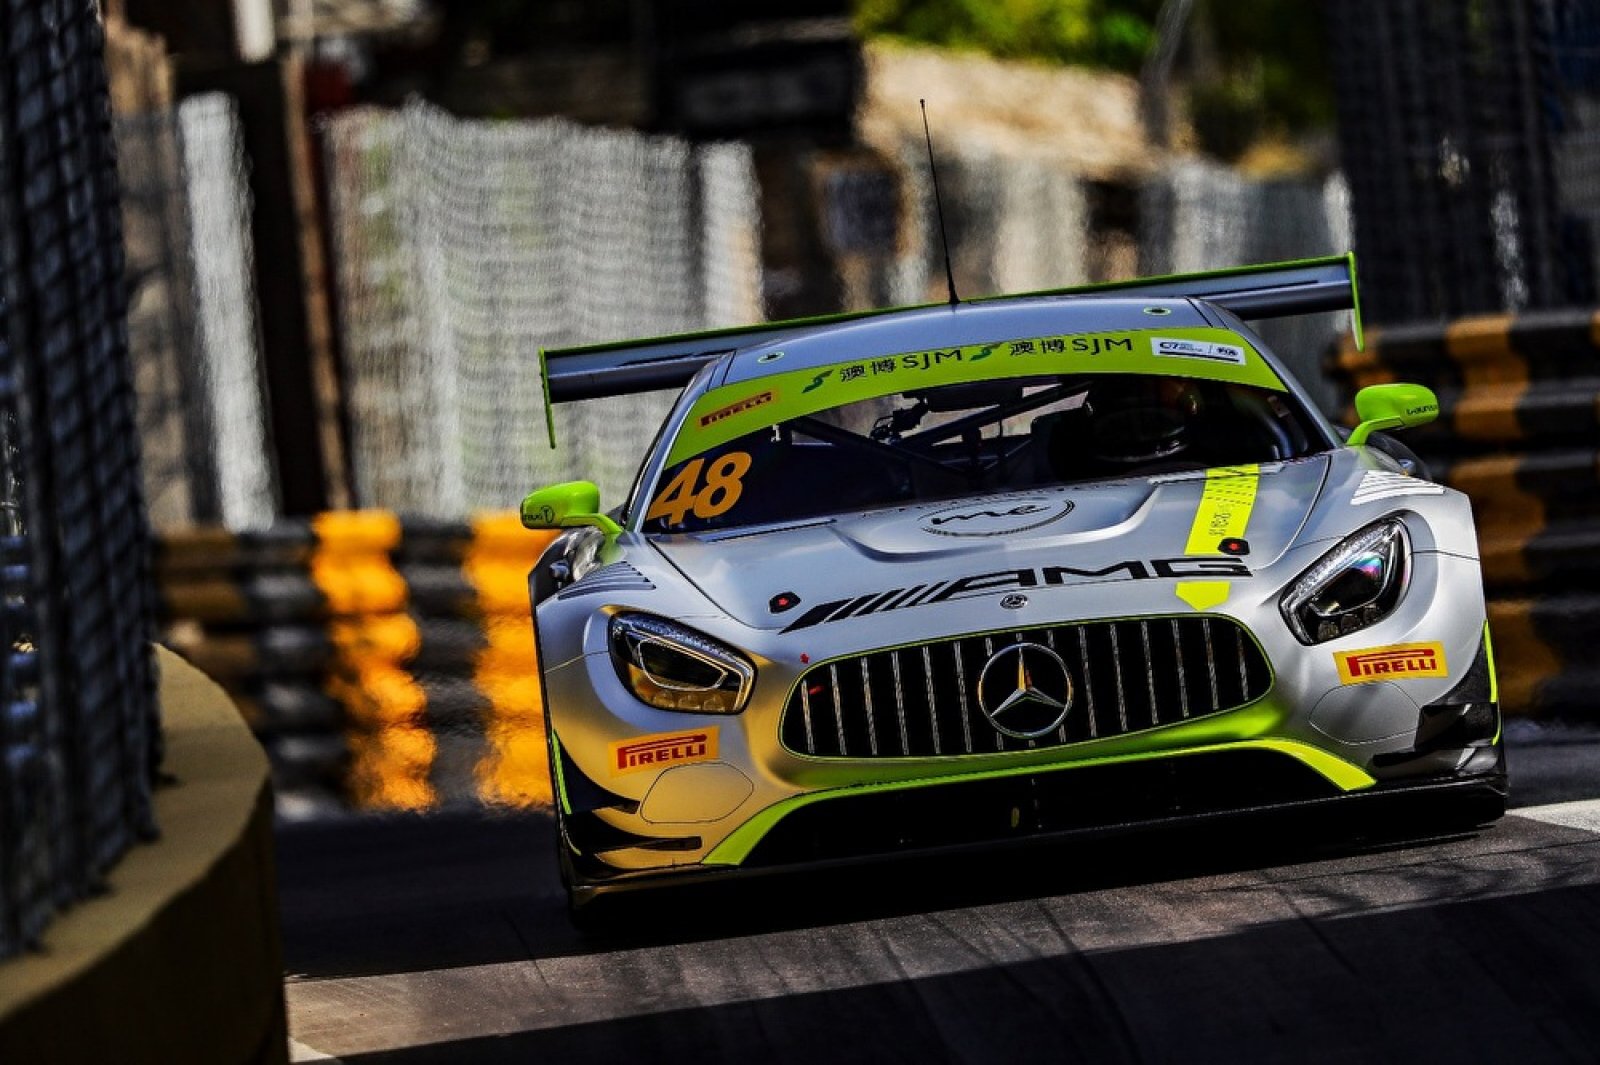 Mercedes-AMG claim victory in FIA GT World Cup